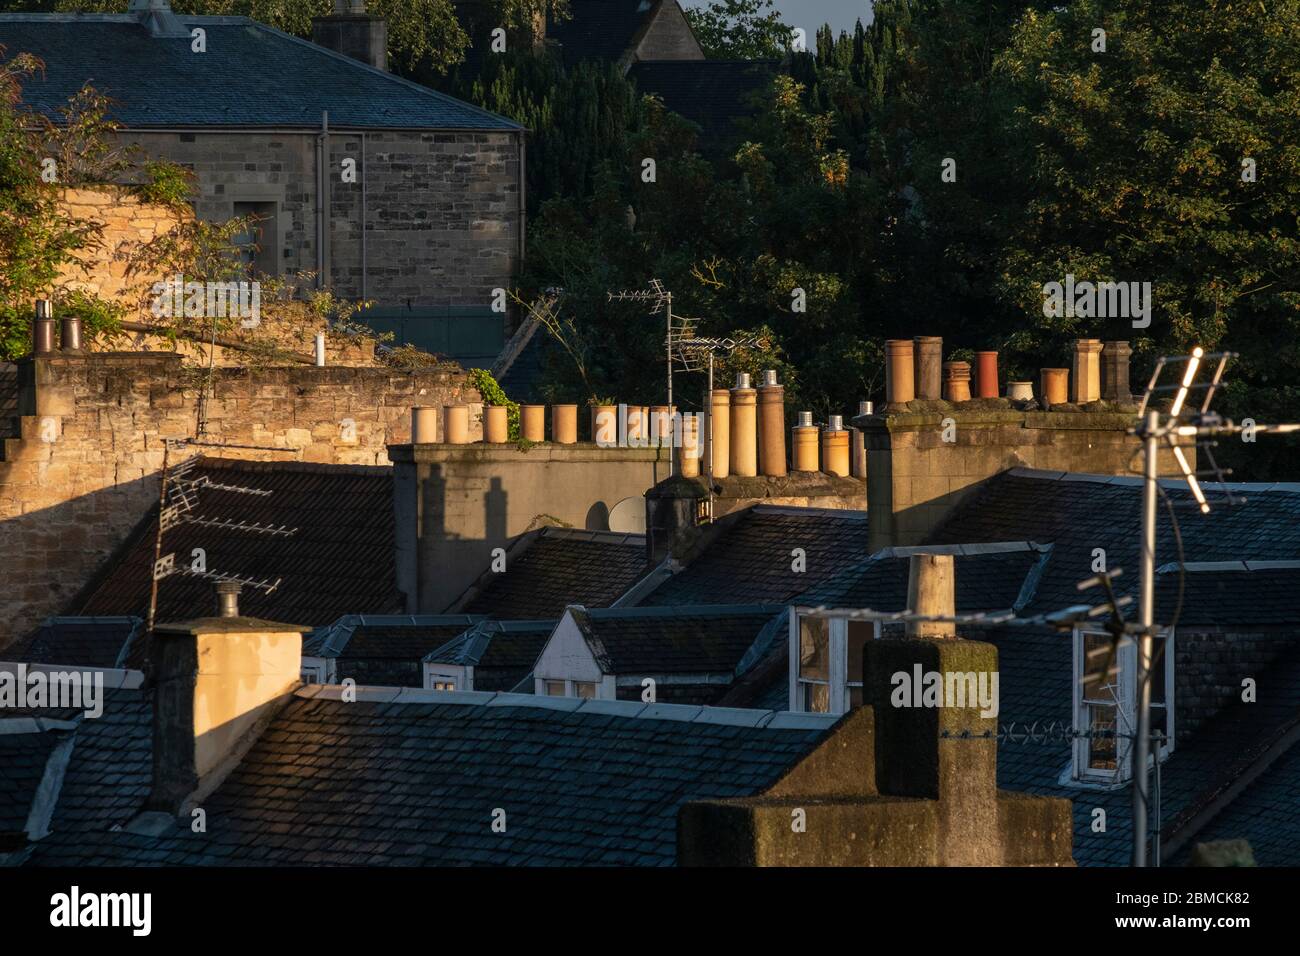 Roof tops and chimney pots Stock Photo